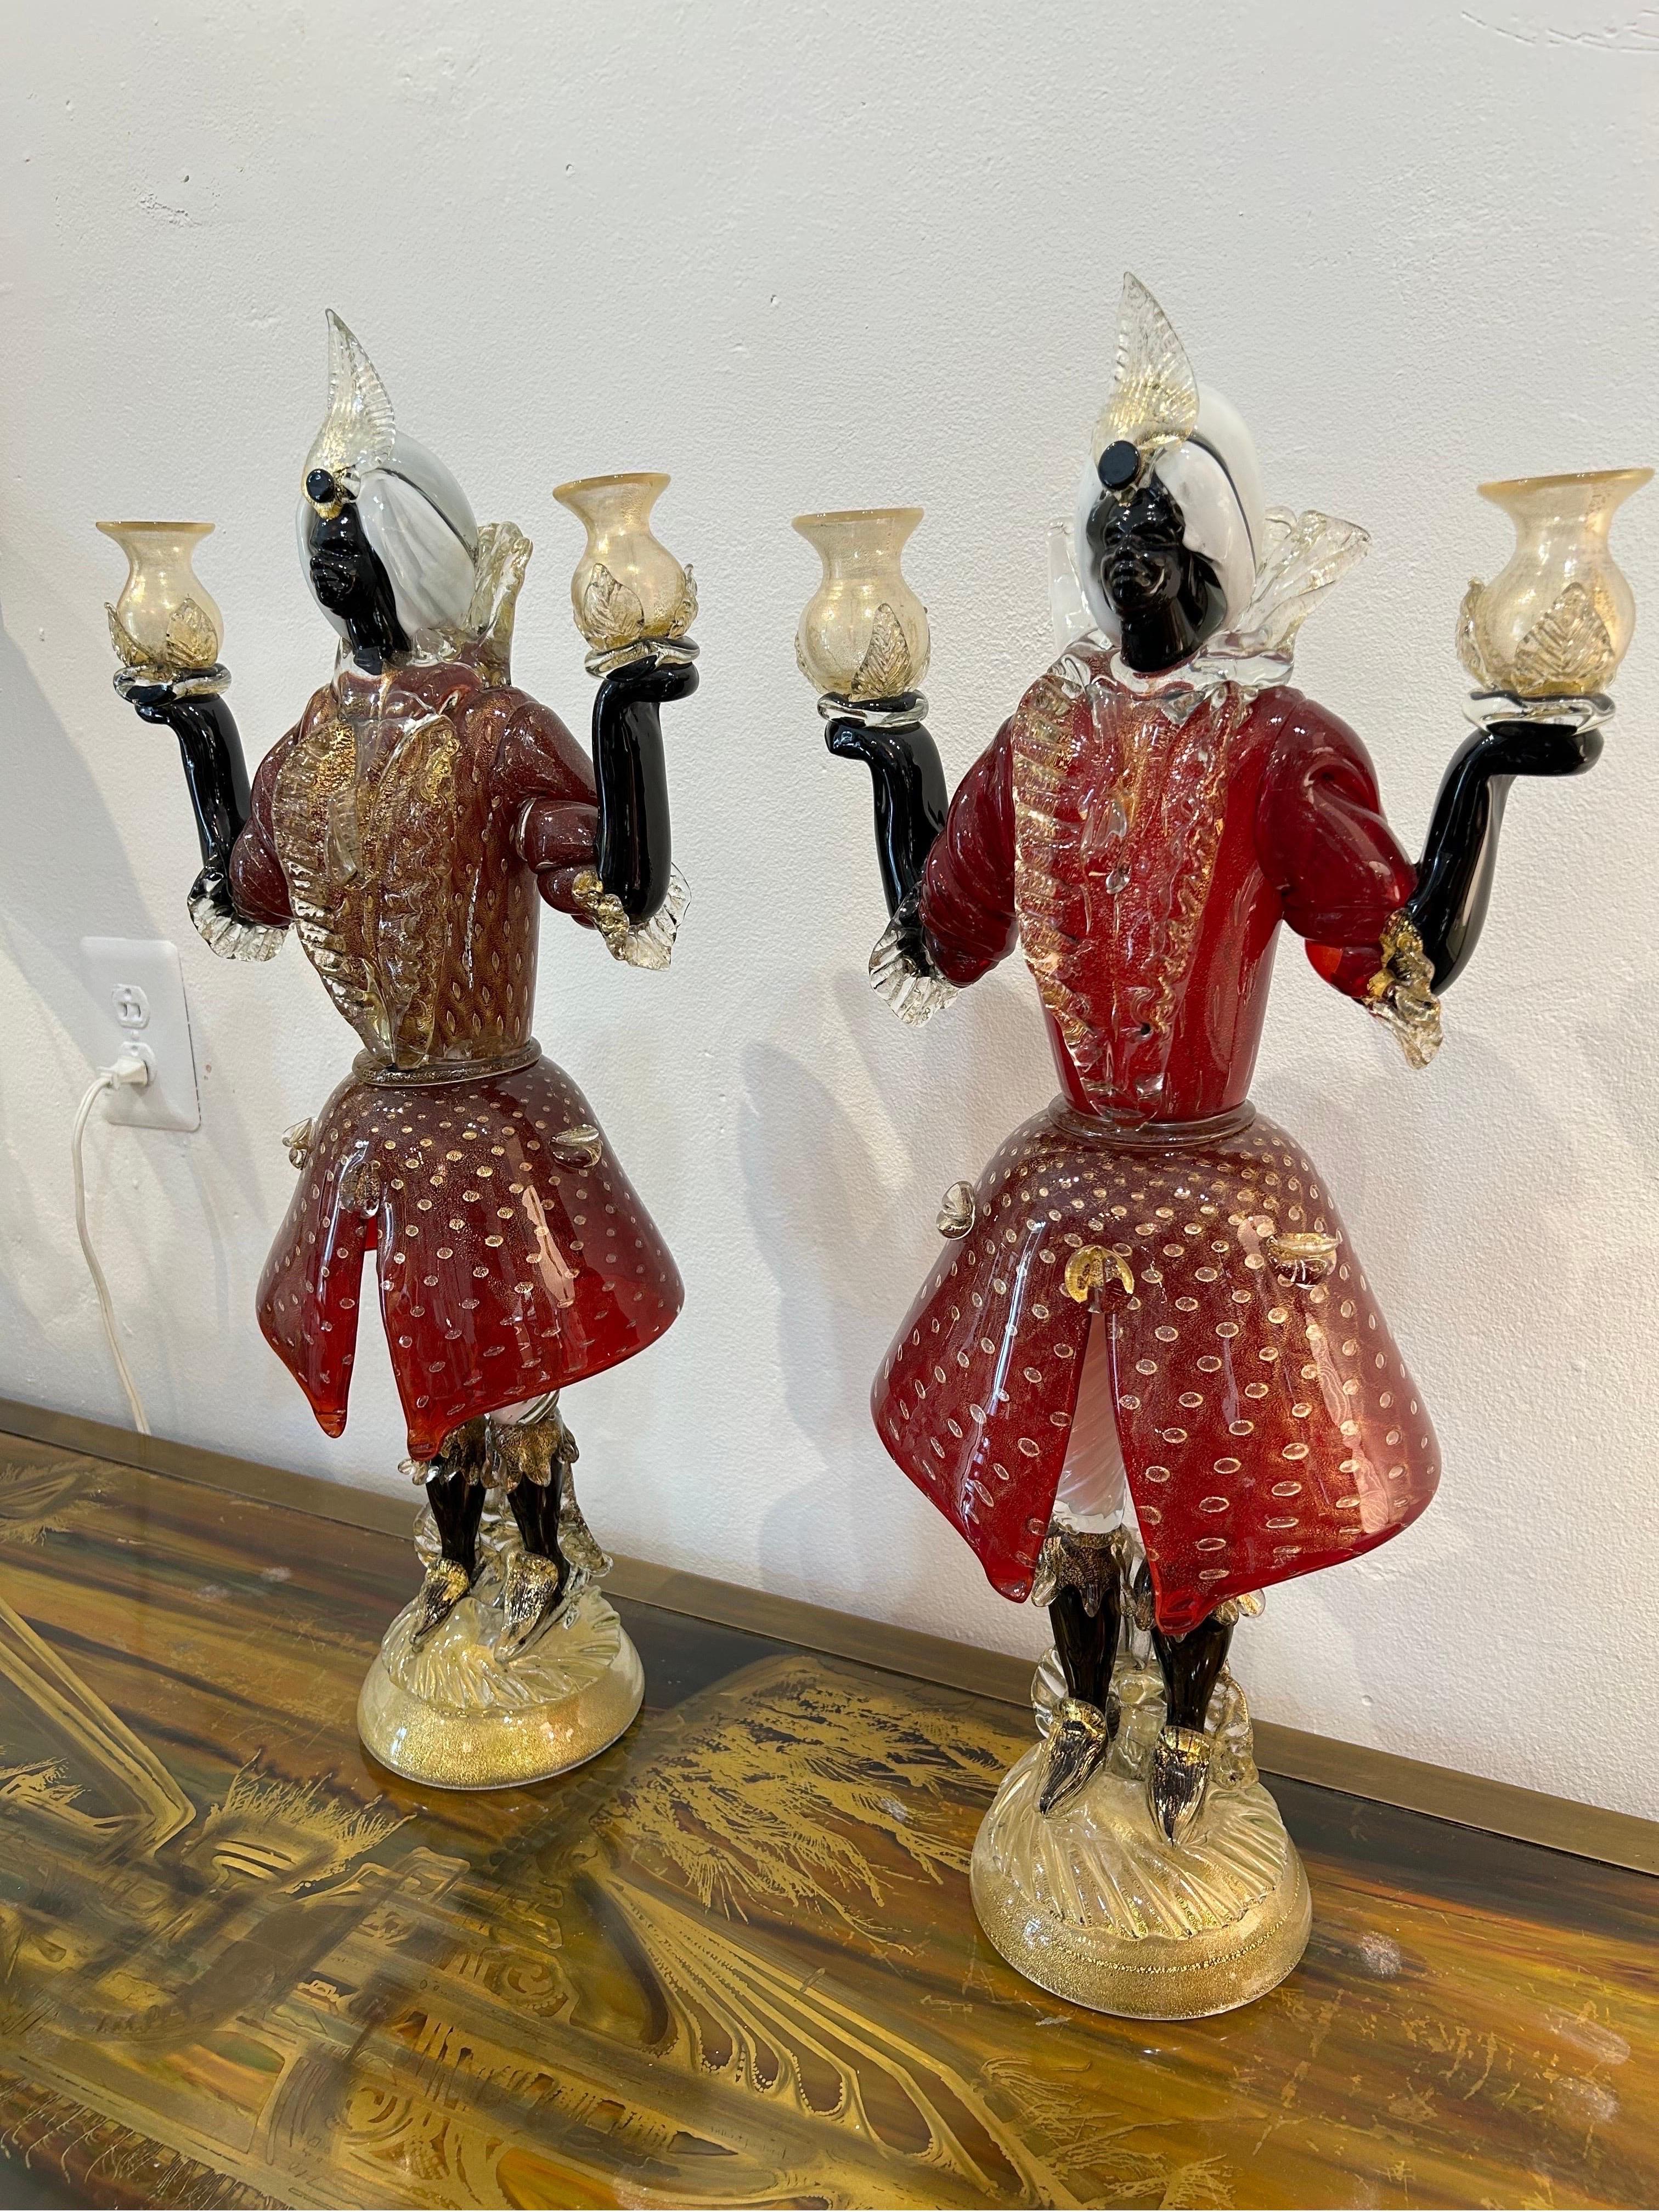 Very beautiful pair of highly decorated figural candleholders … ornately dressed figures in the 18th century Venmetiian ..Decorated in shades of red gold black and white glass… infused with bubbles and gold inclusions…Largest pair of figural